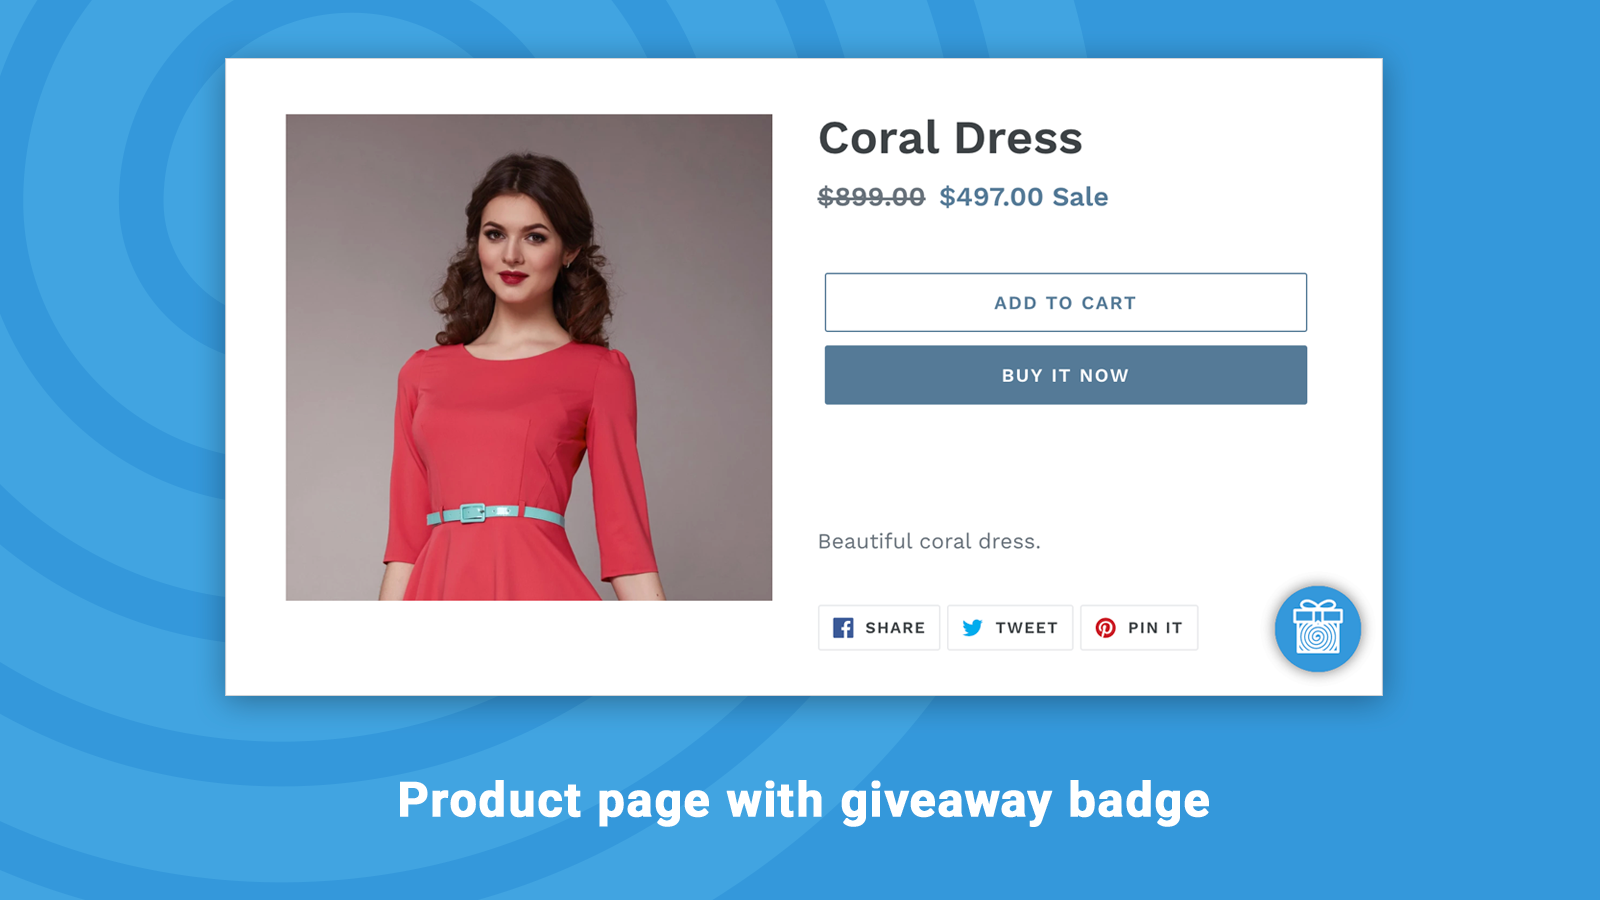 Product page with giveaway badge